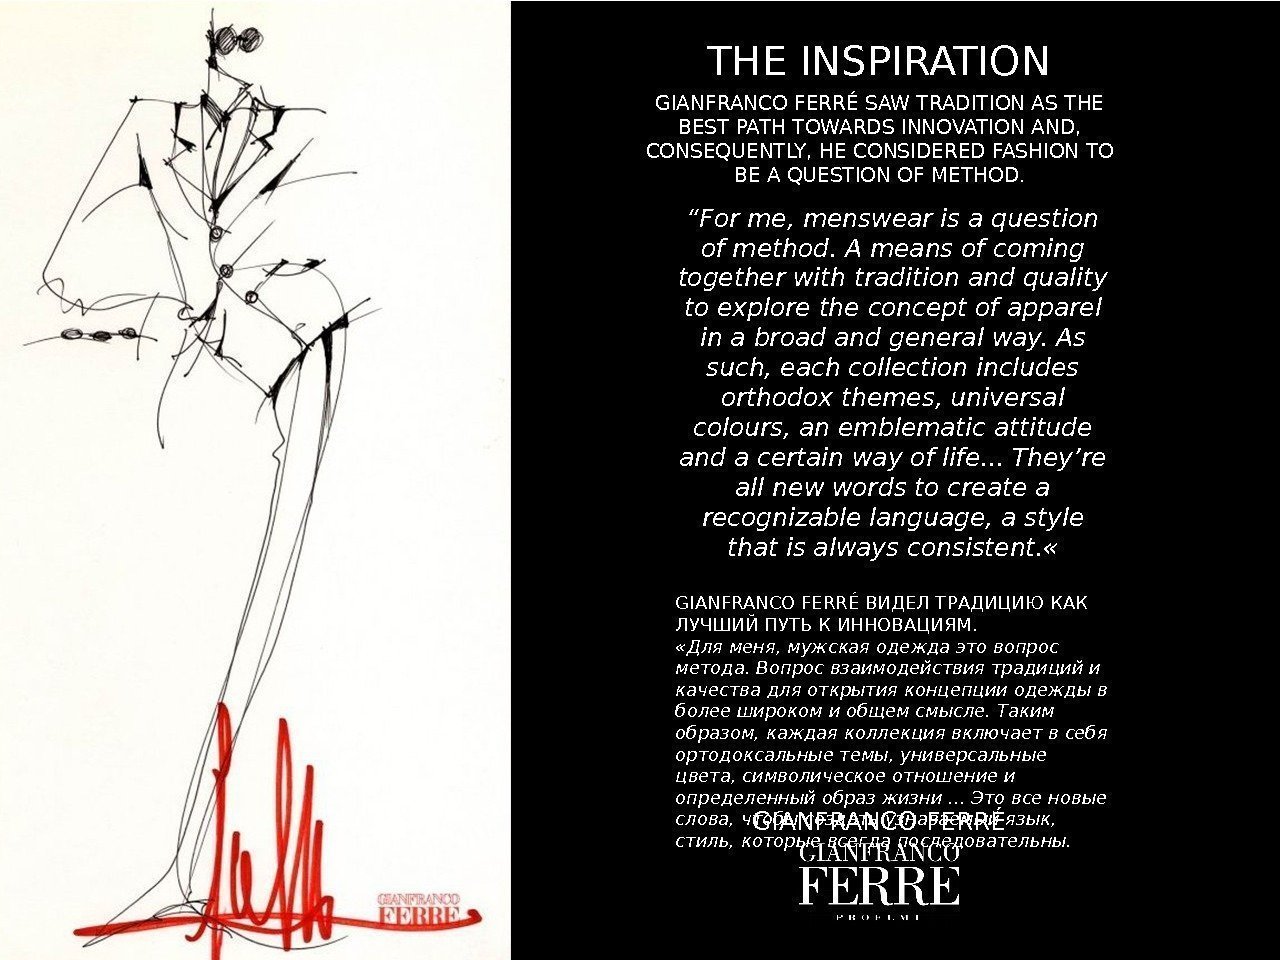 GIANFRANCO FERRÉ SAW TRADITION AS THE BEST PATH TOWARDS INNOVATION AND,  CONSEQUENTLY, HE